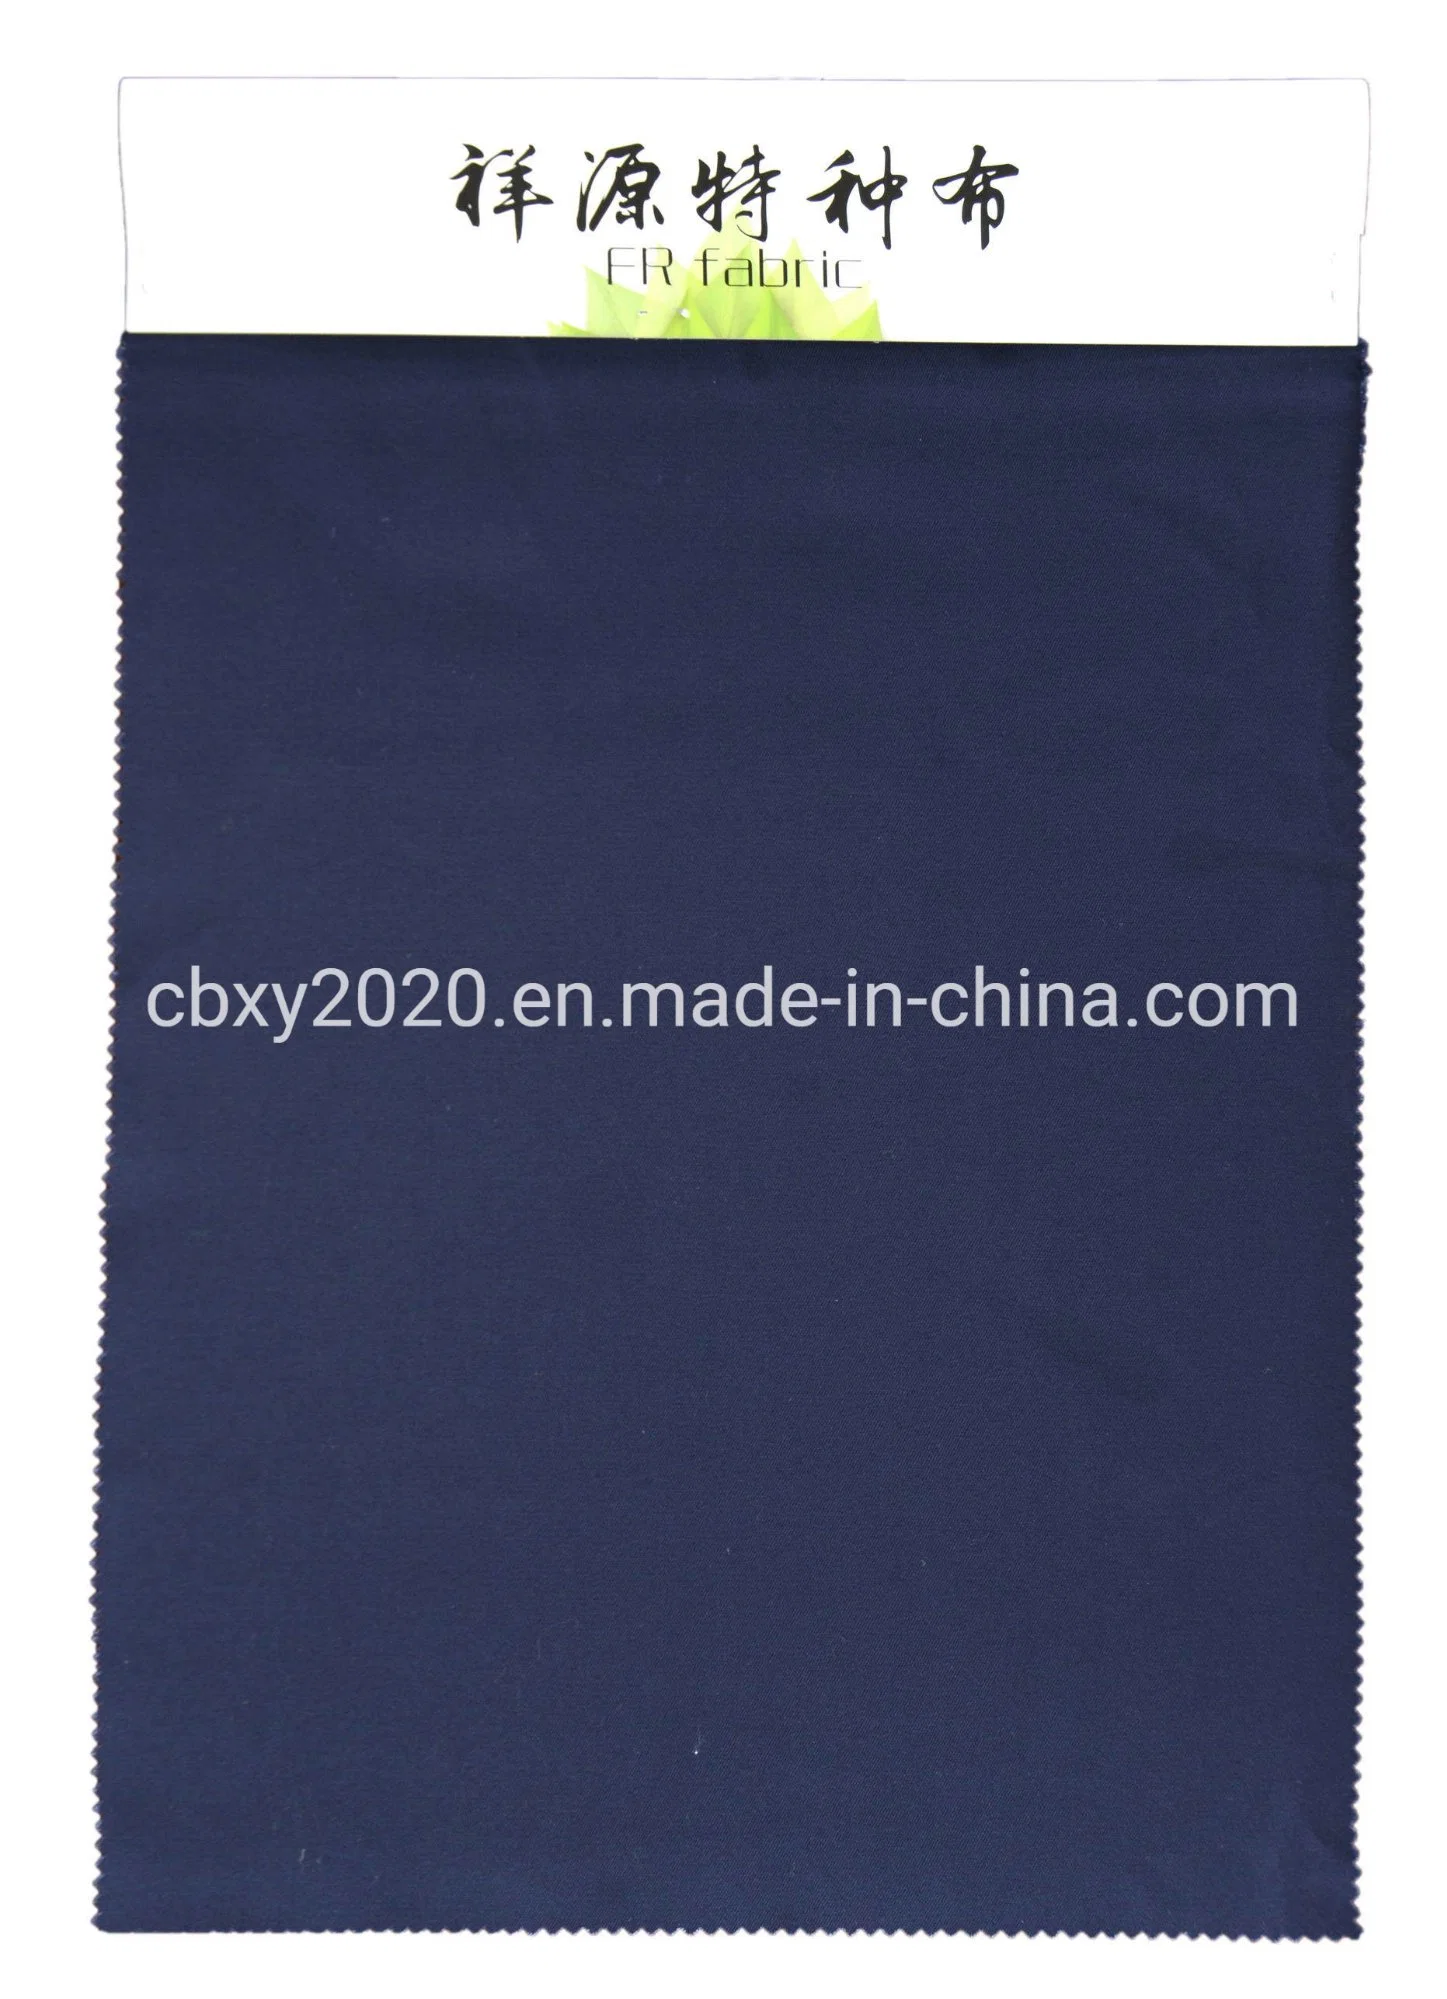 100% Cotton Woven Textile with Waterproof/Flame Retardant/Oil Repellent/Anti-Acid for Jacket/Uniform/Garment/ Security/Industry